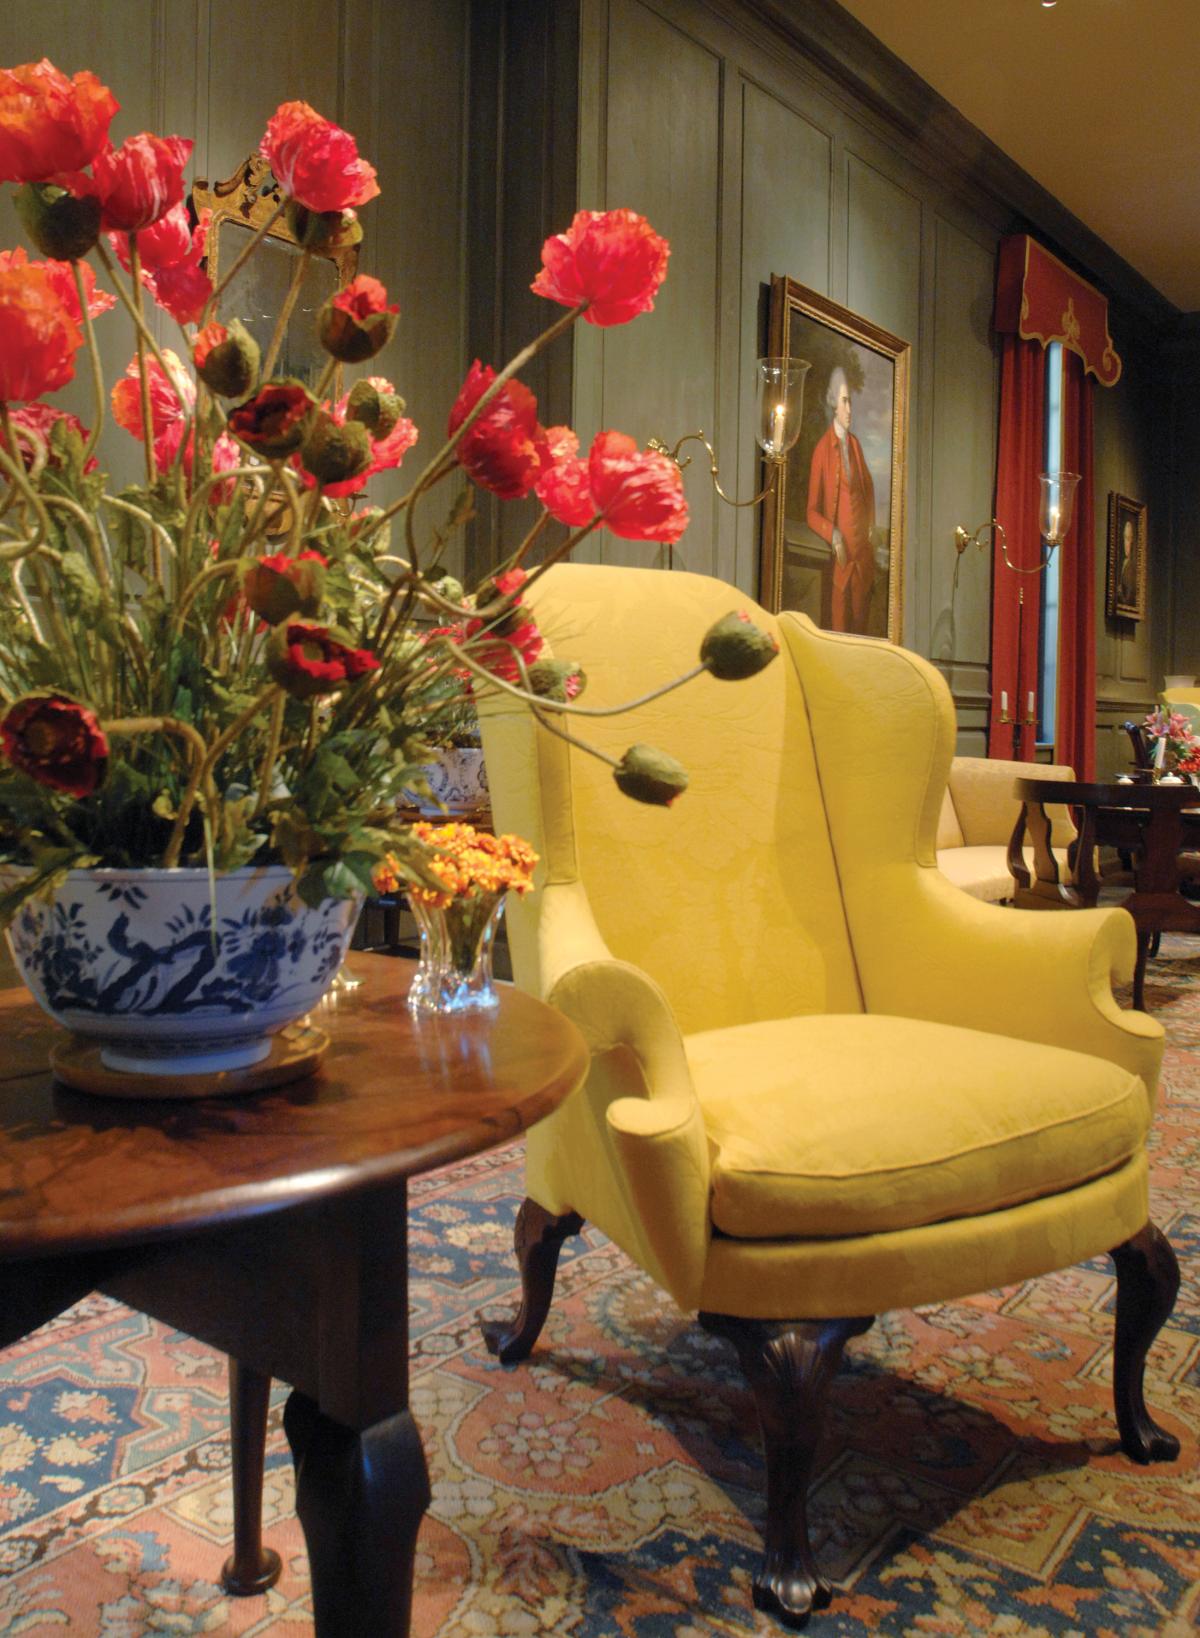 Photograph of a yellow chair with a bouquet of red flowers next to it